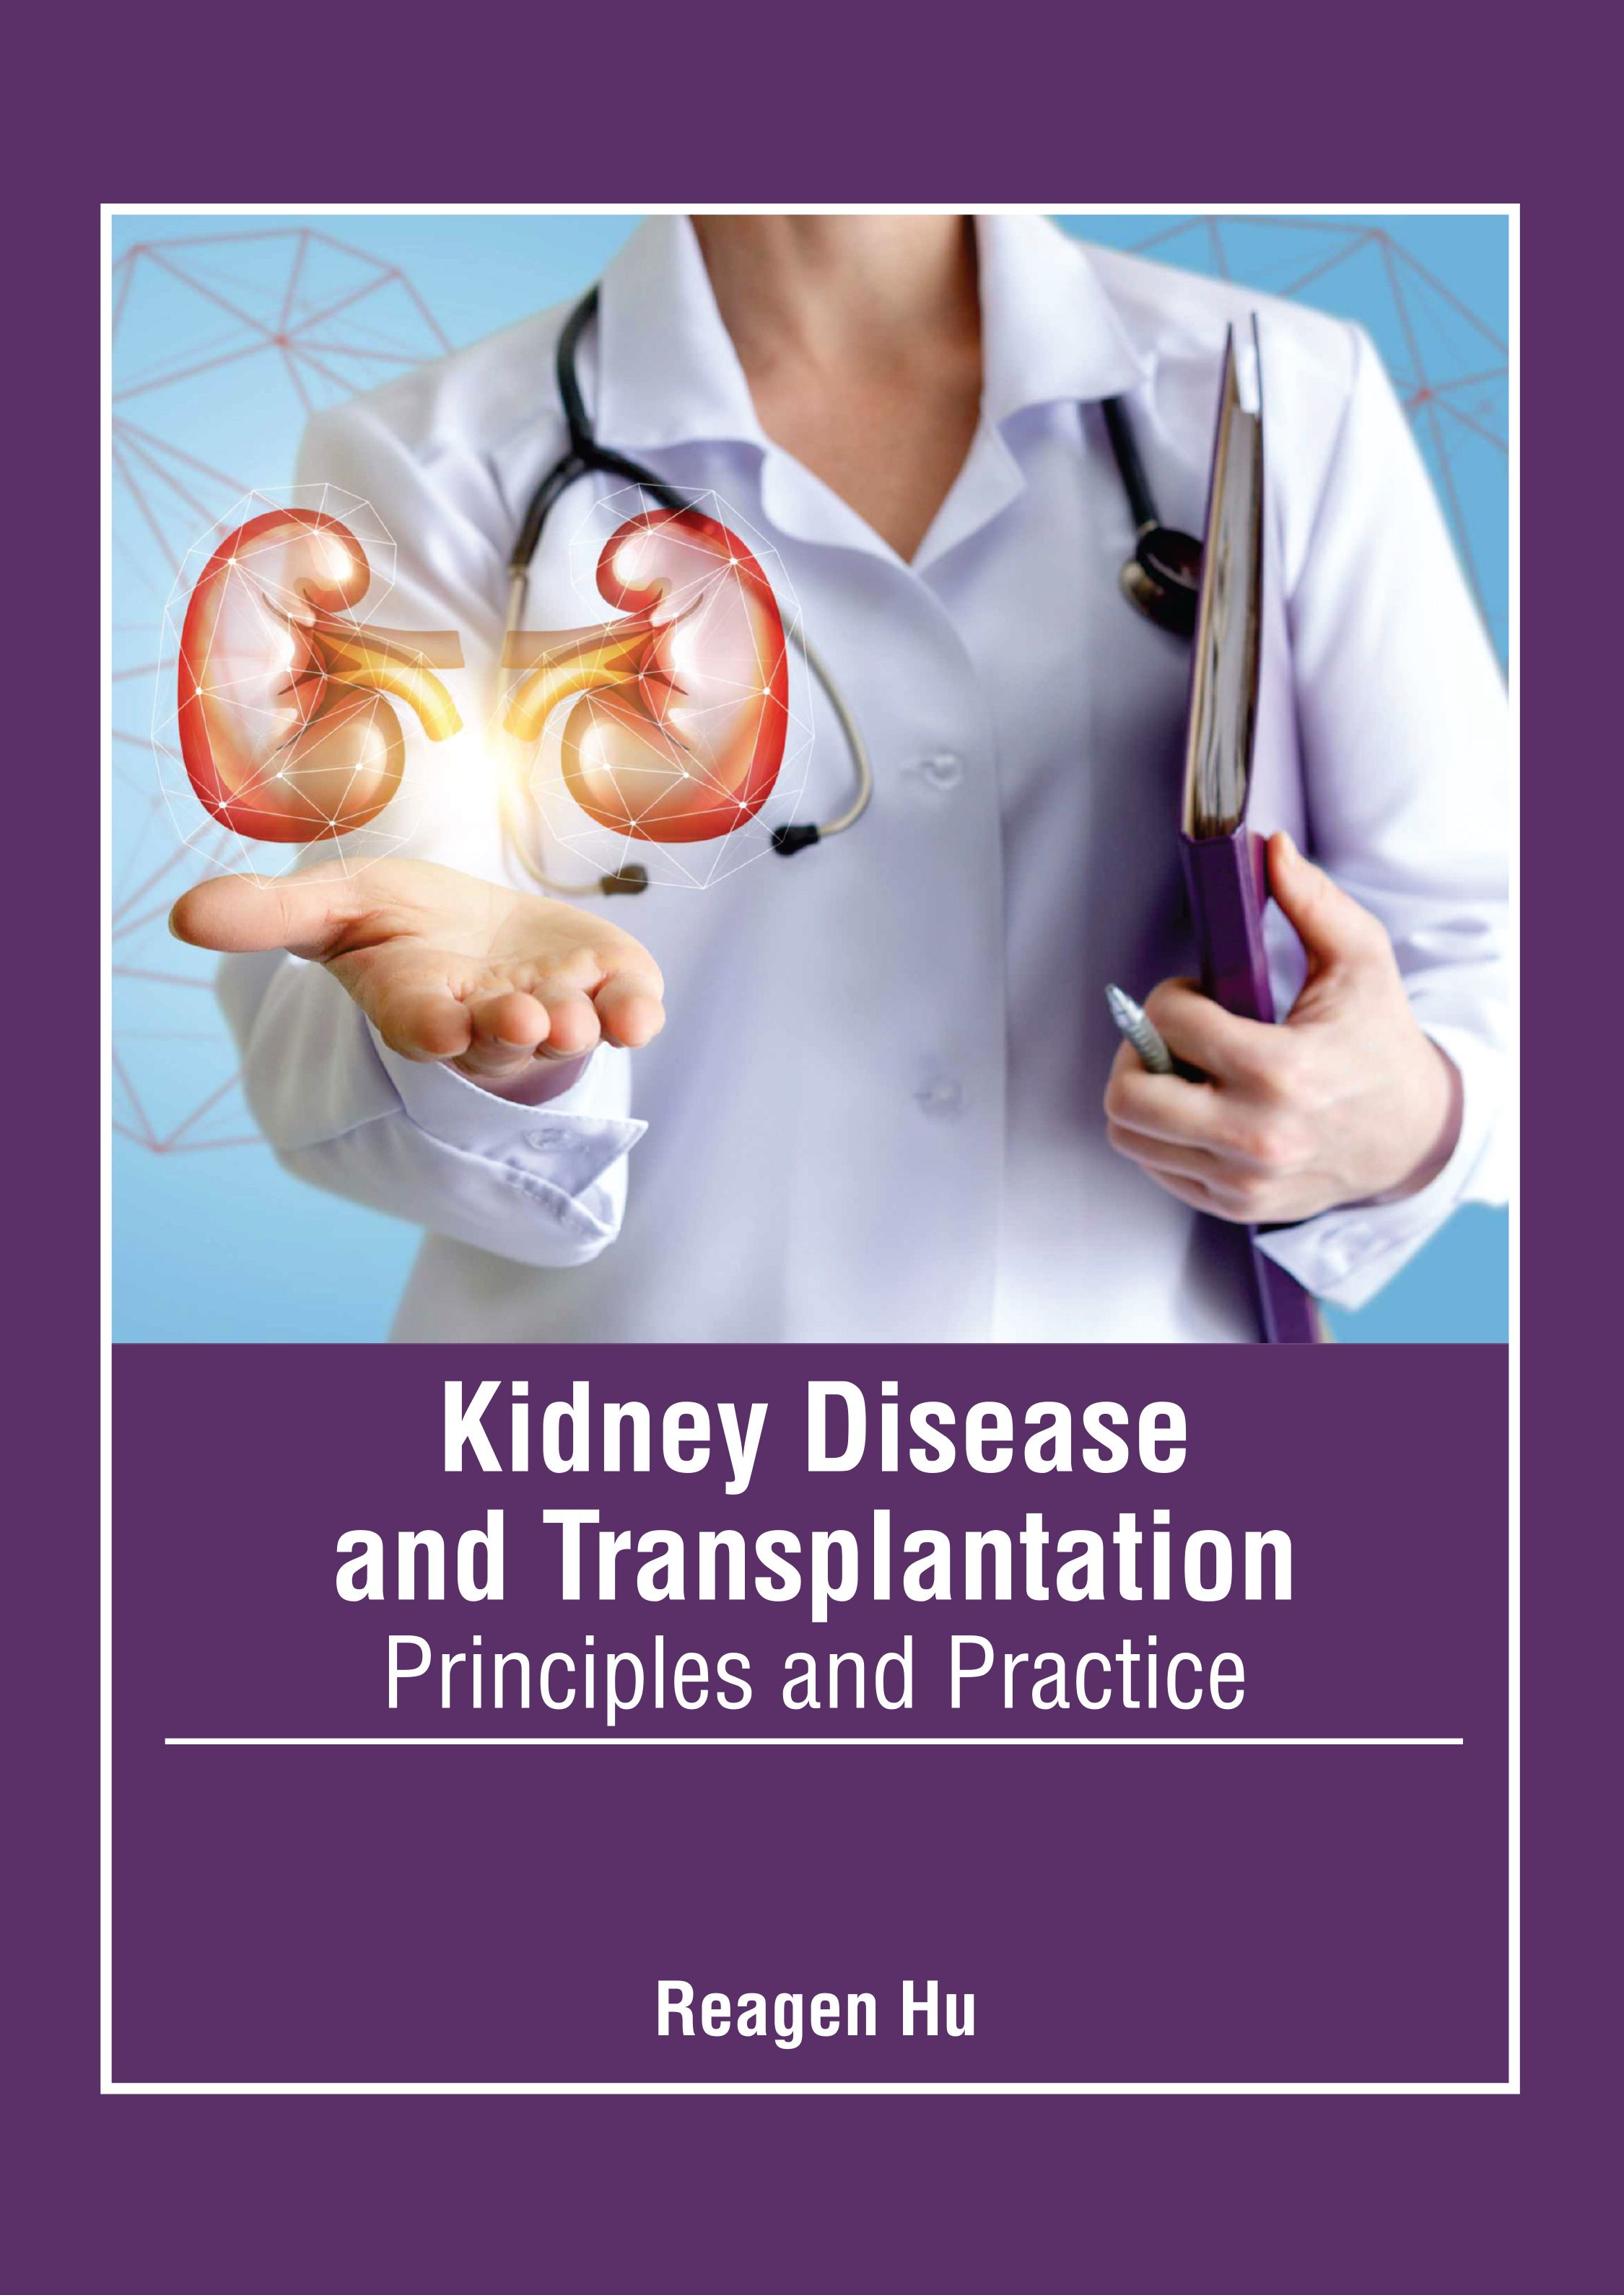 

exclusive-publishers/american-medical-publishers/kidney-disease-and-transplantation-principles-and-practice-9781639277094